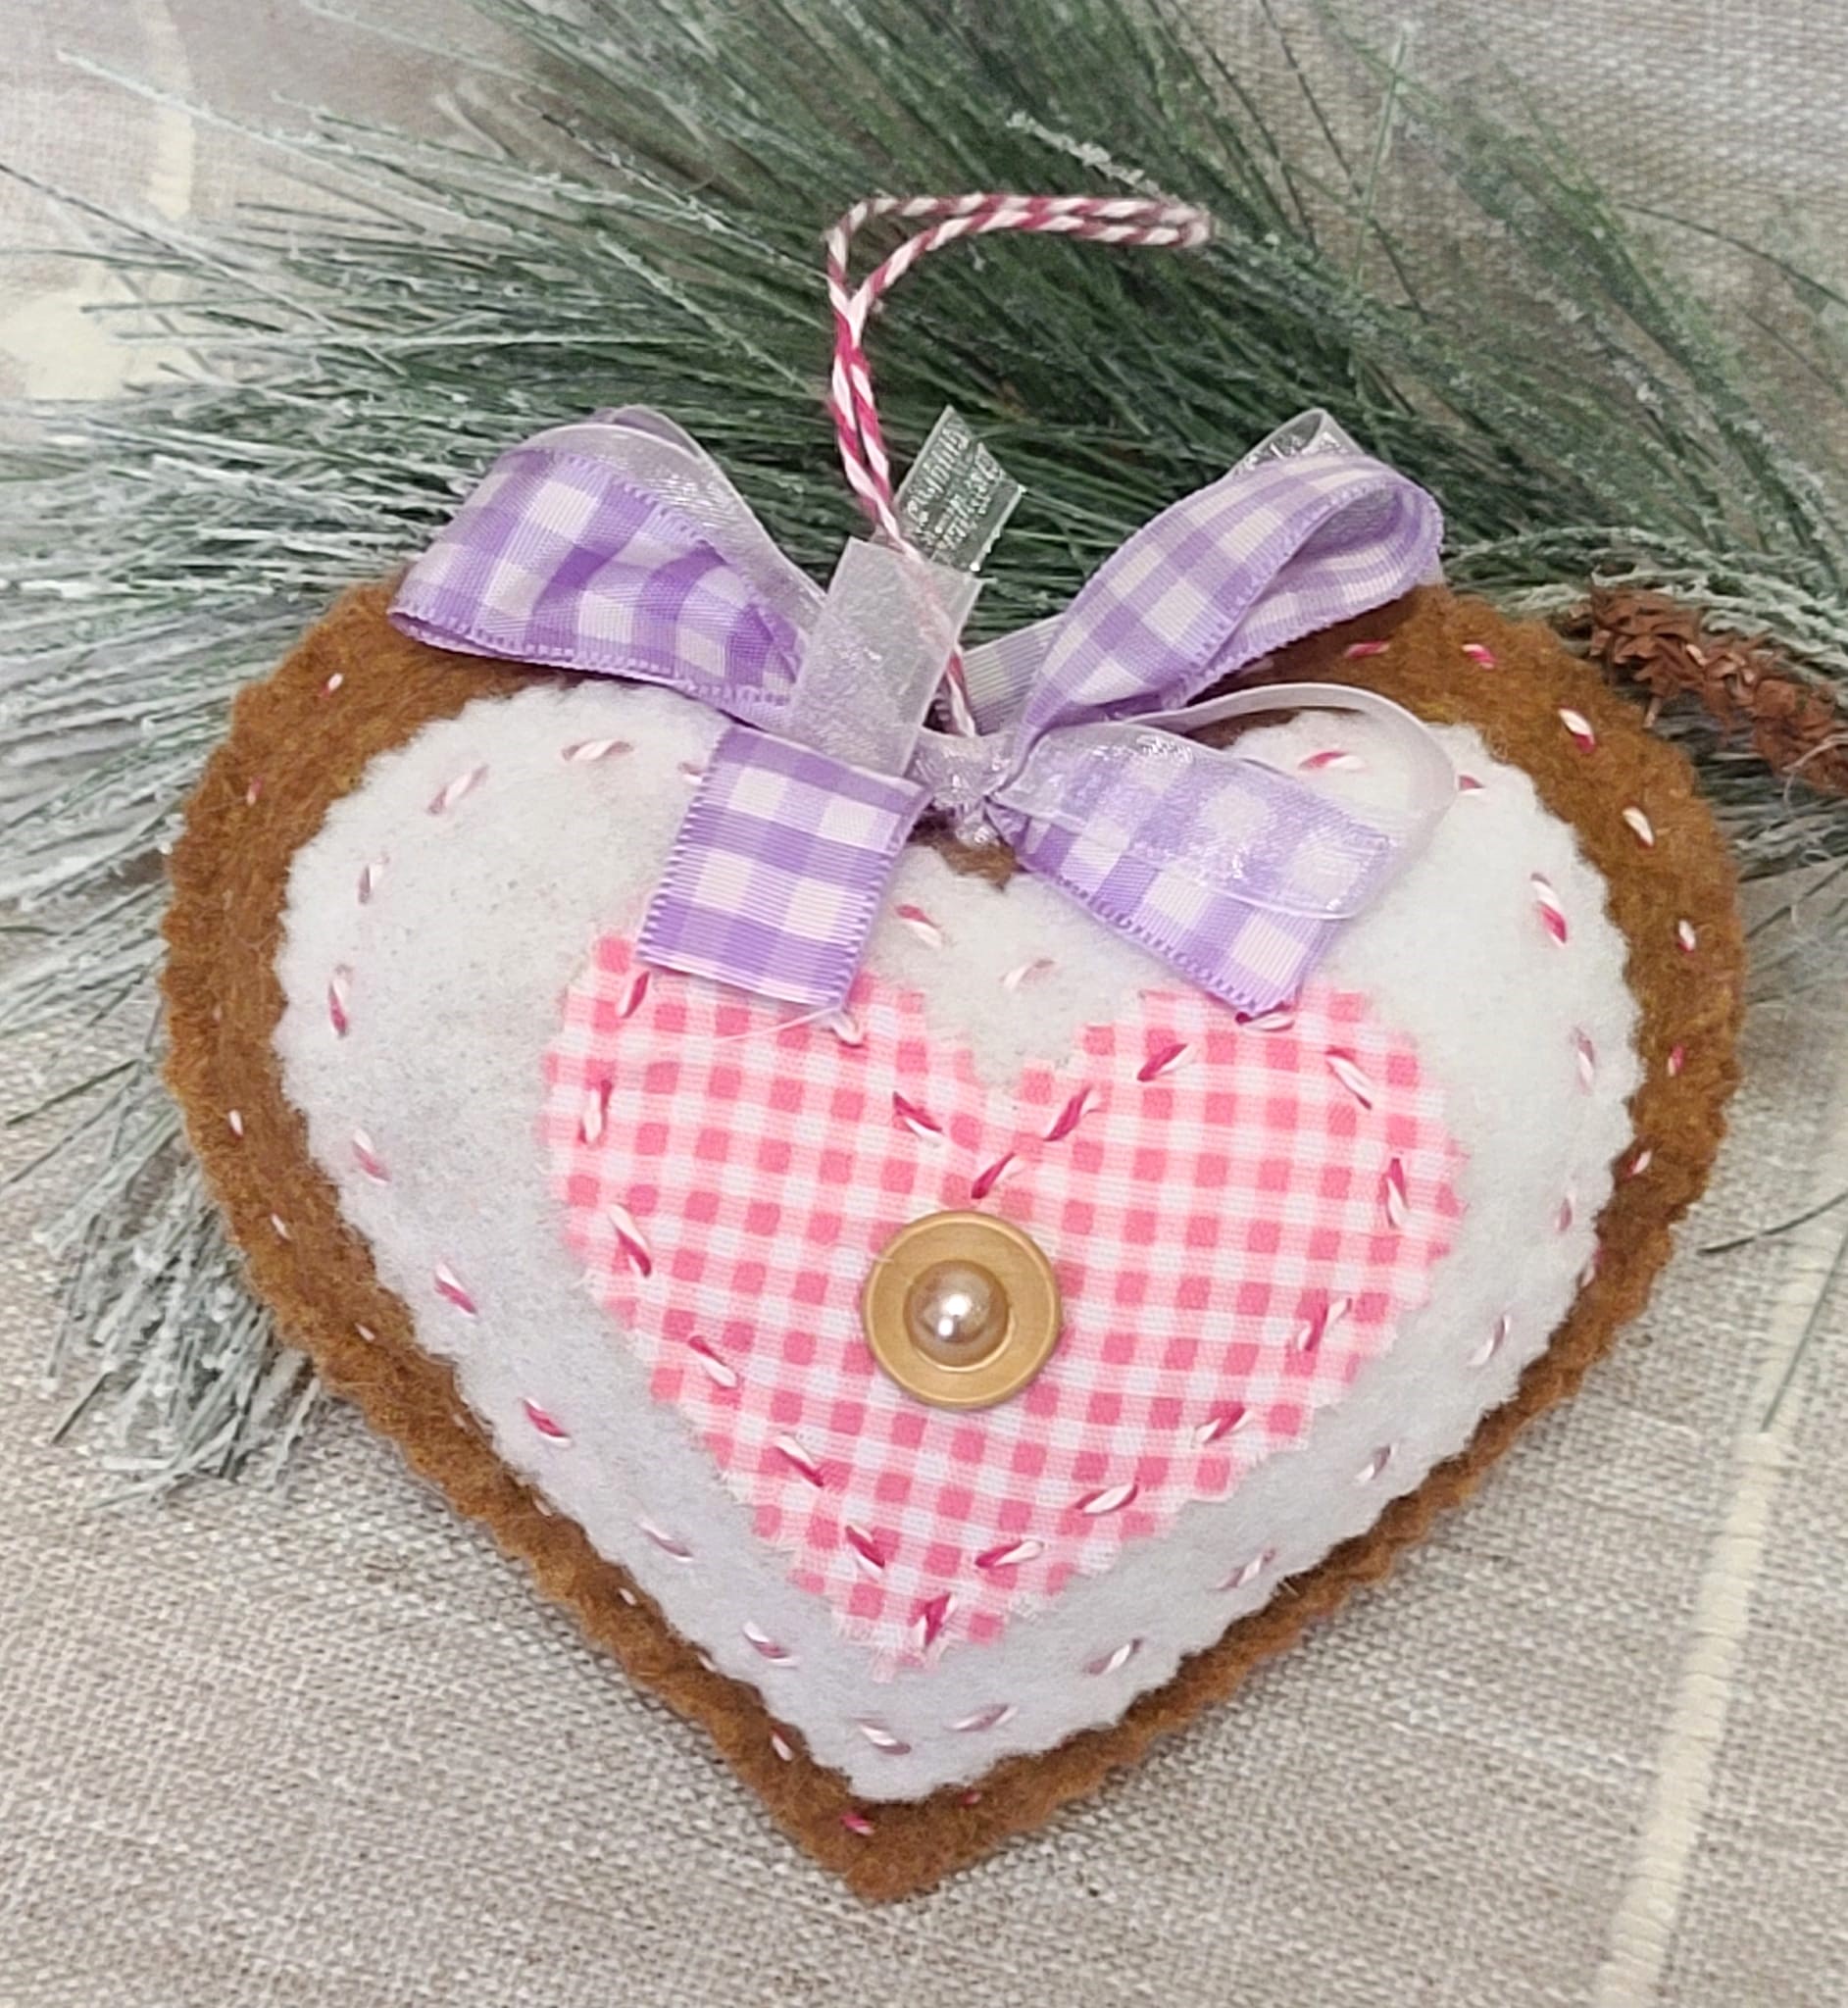 Gingerbread felt and gingham fabric heart ornament - PINK